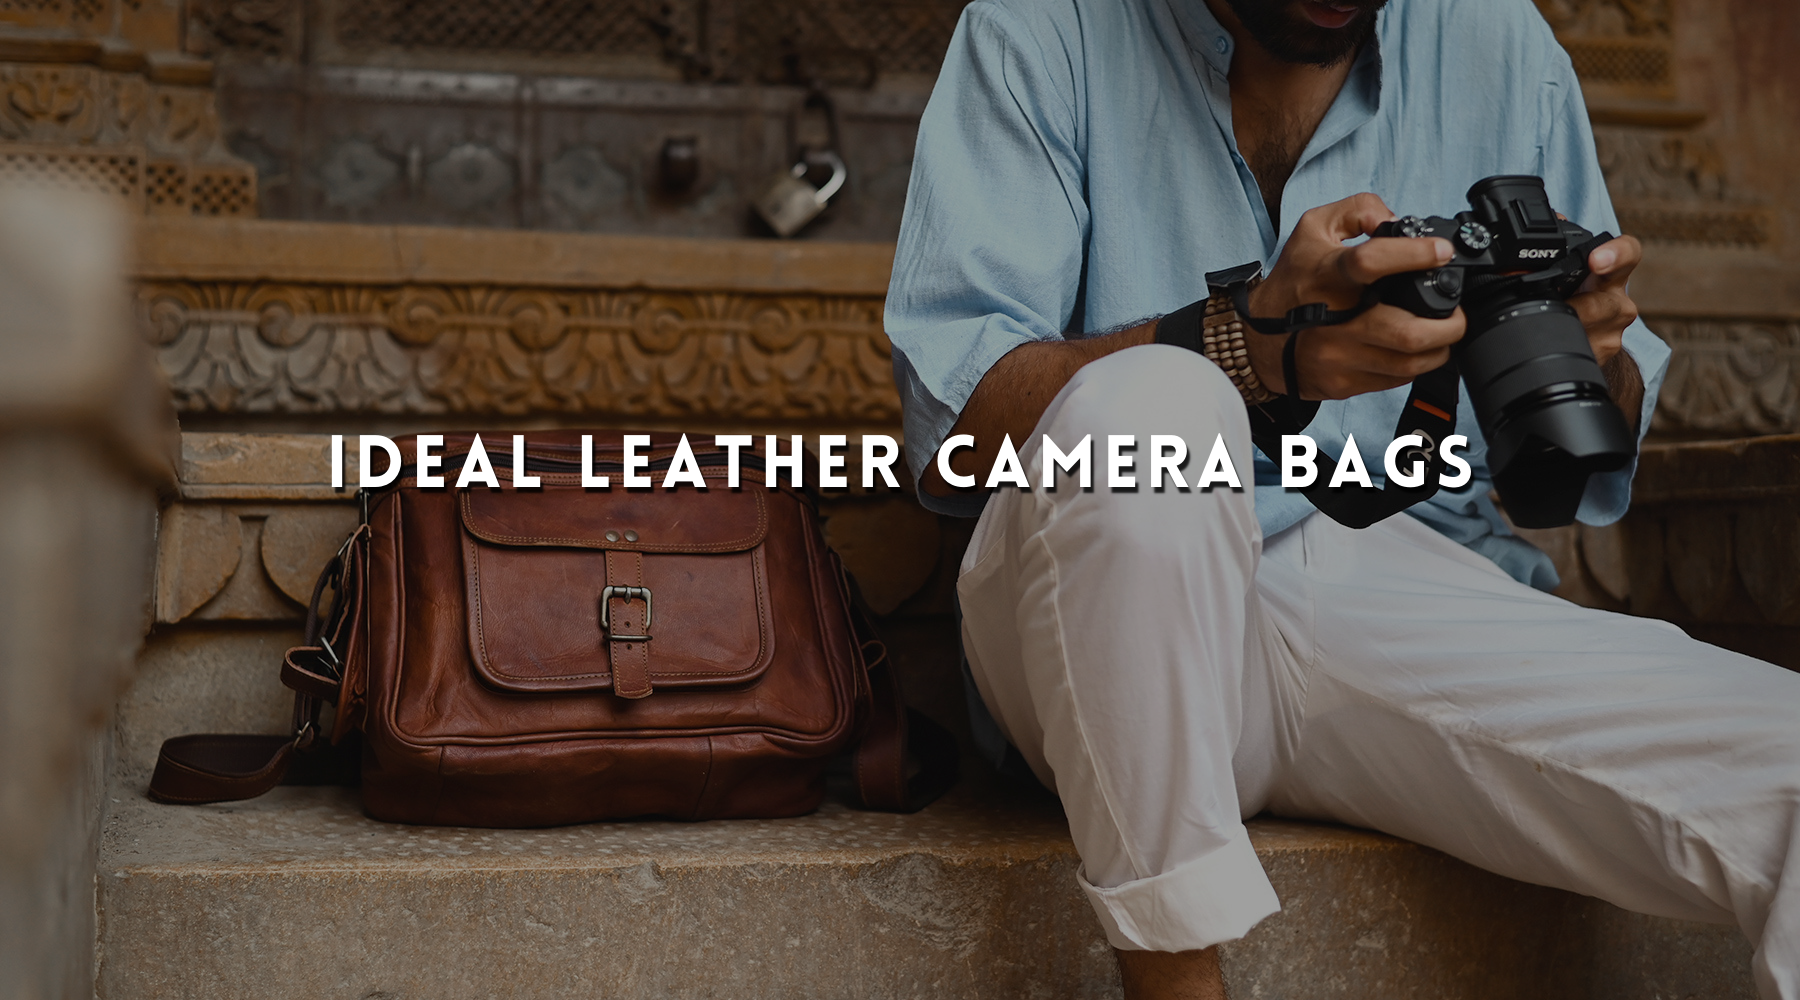 Ideal leather camera bag for photographers